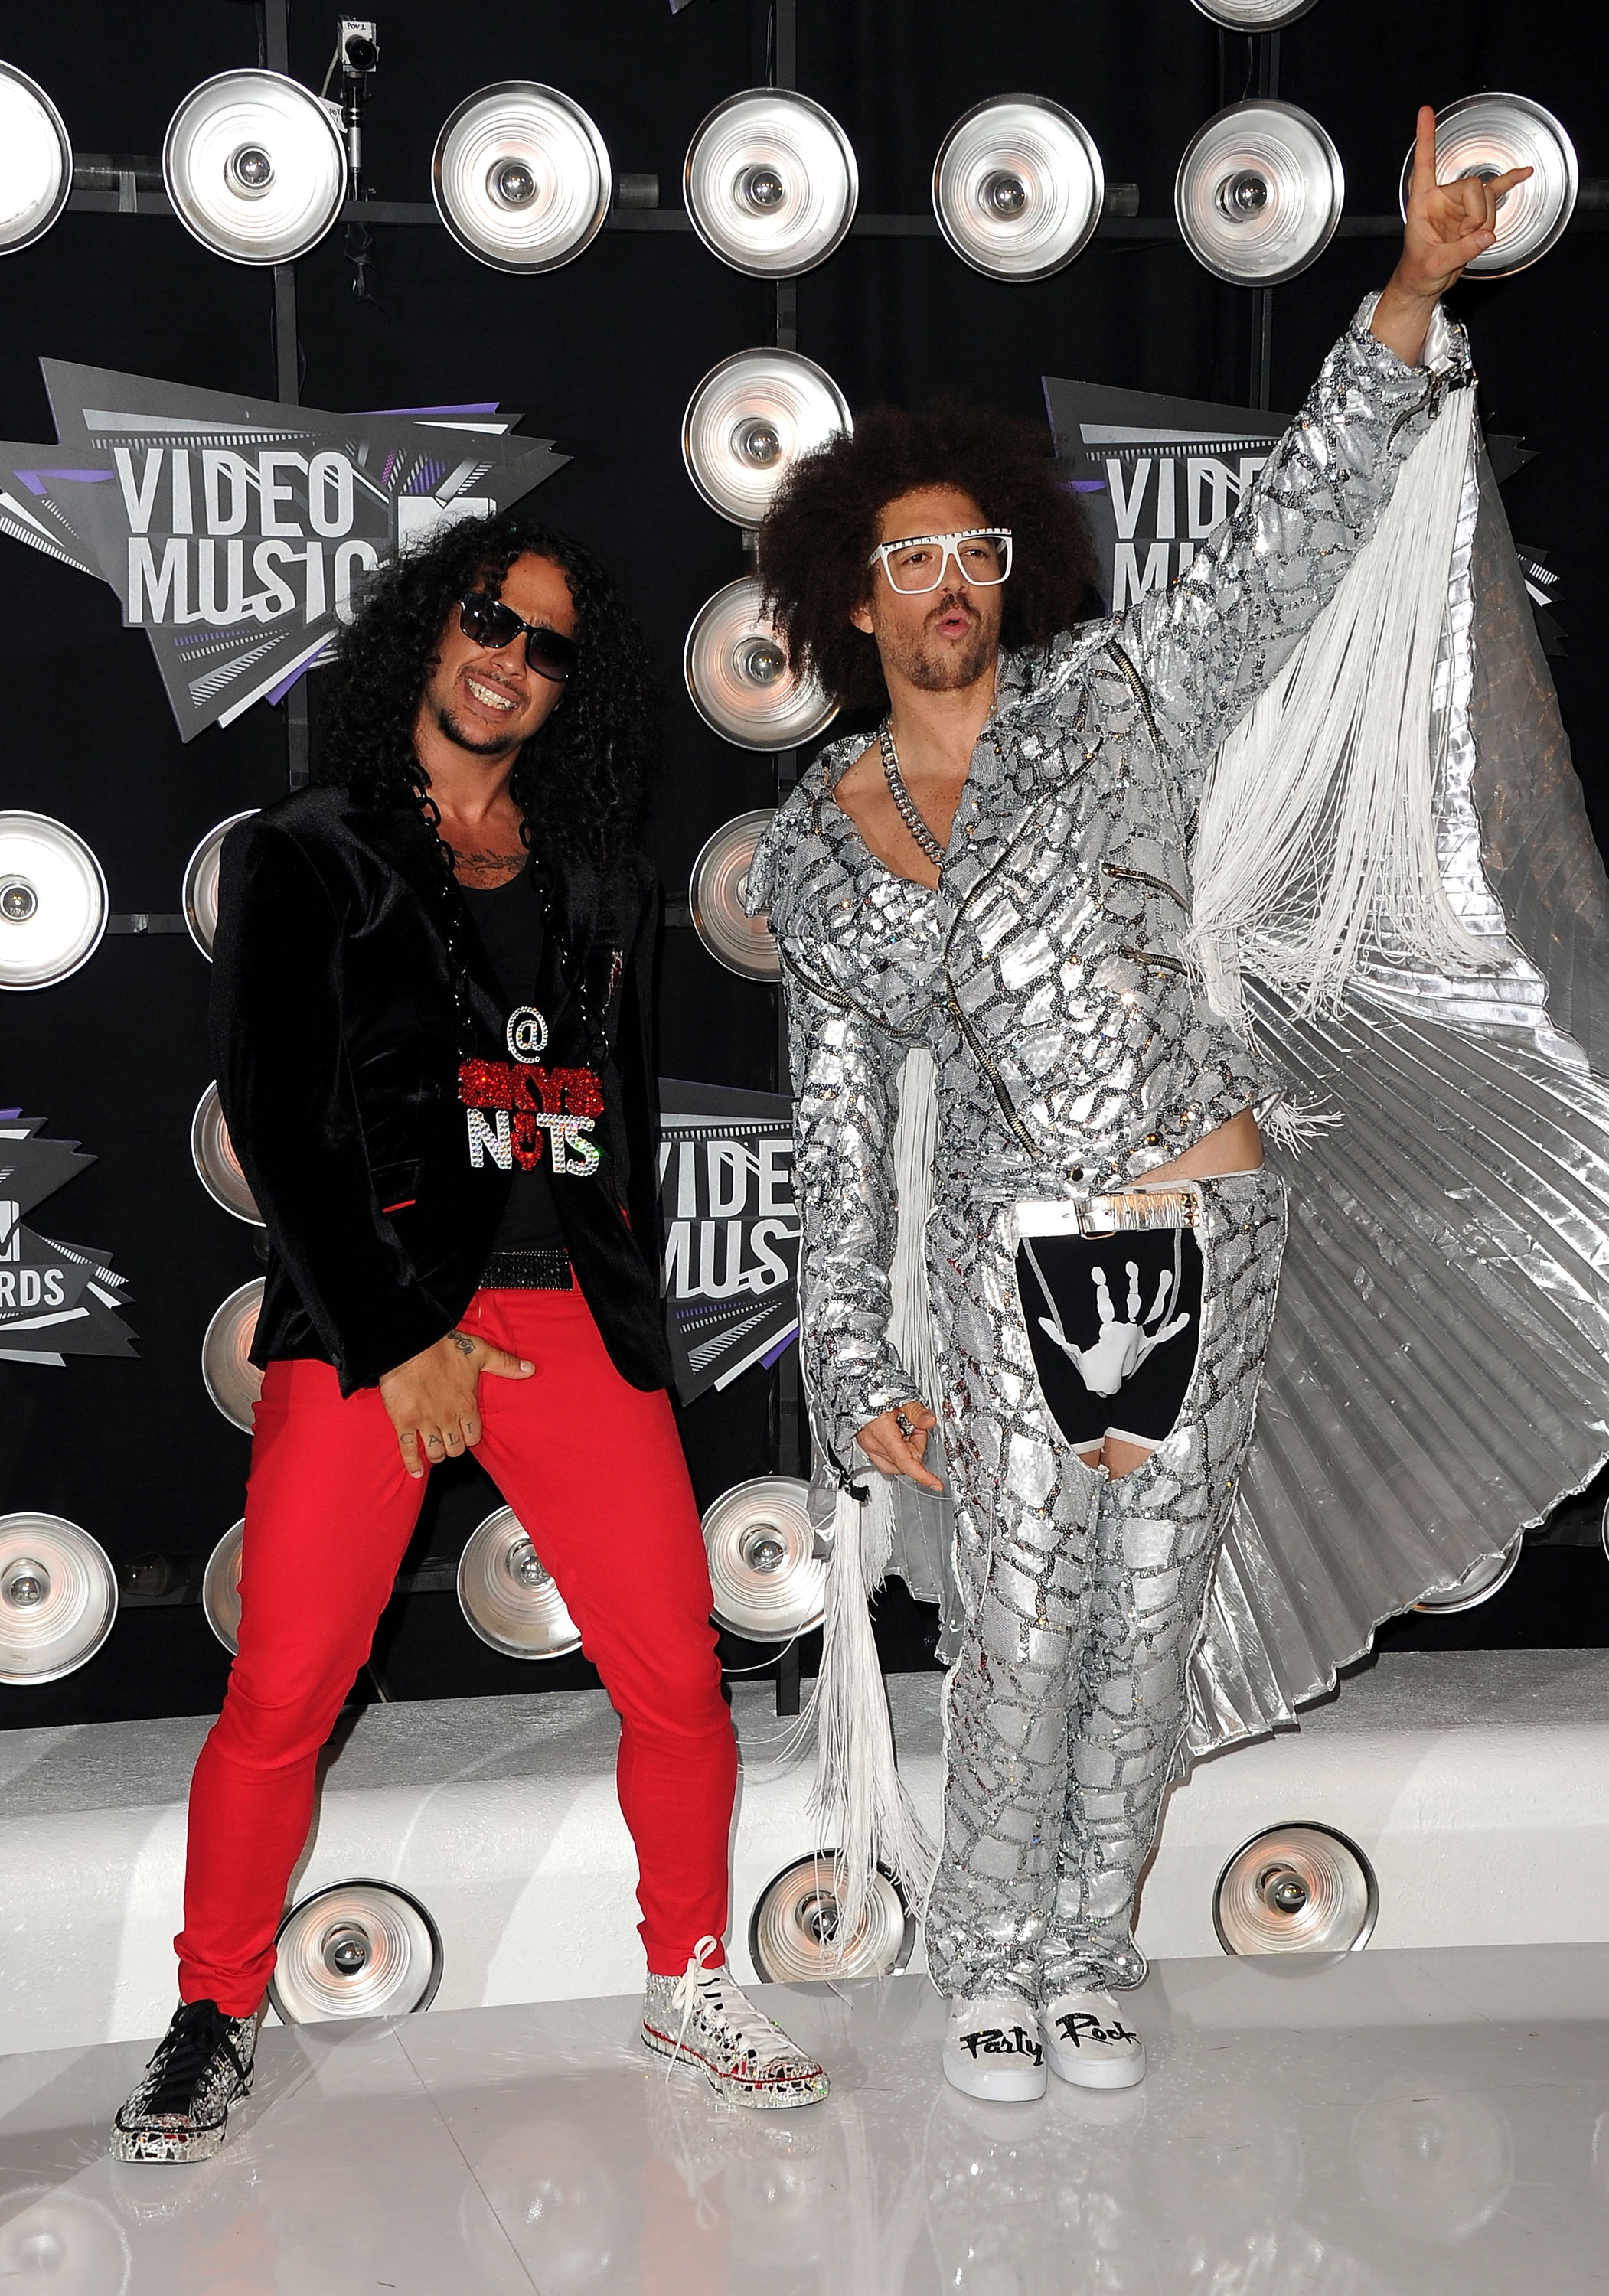 TV guide for LMFAO, Non-stop entertainment, Catchy tunes, High-energy music, 2110x3000 HD Handy